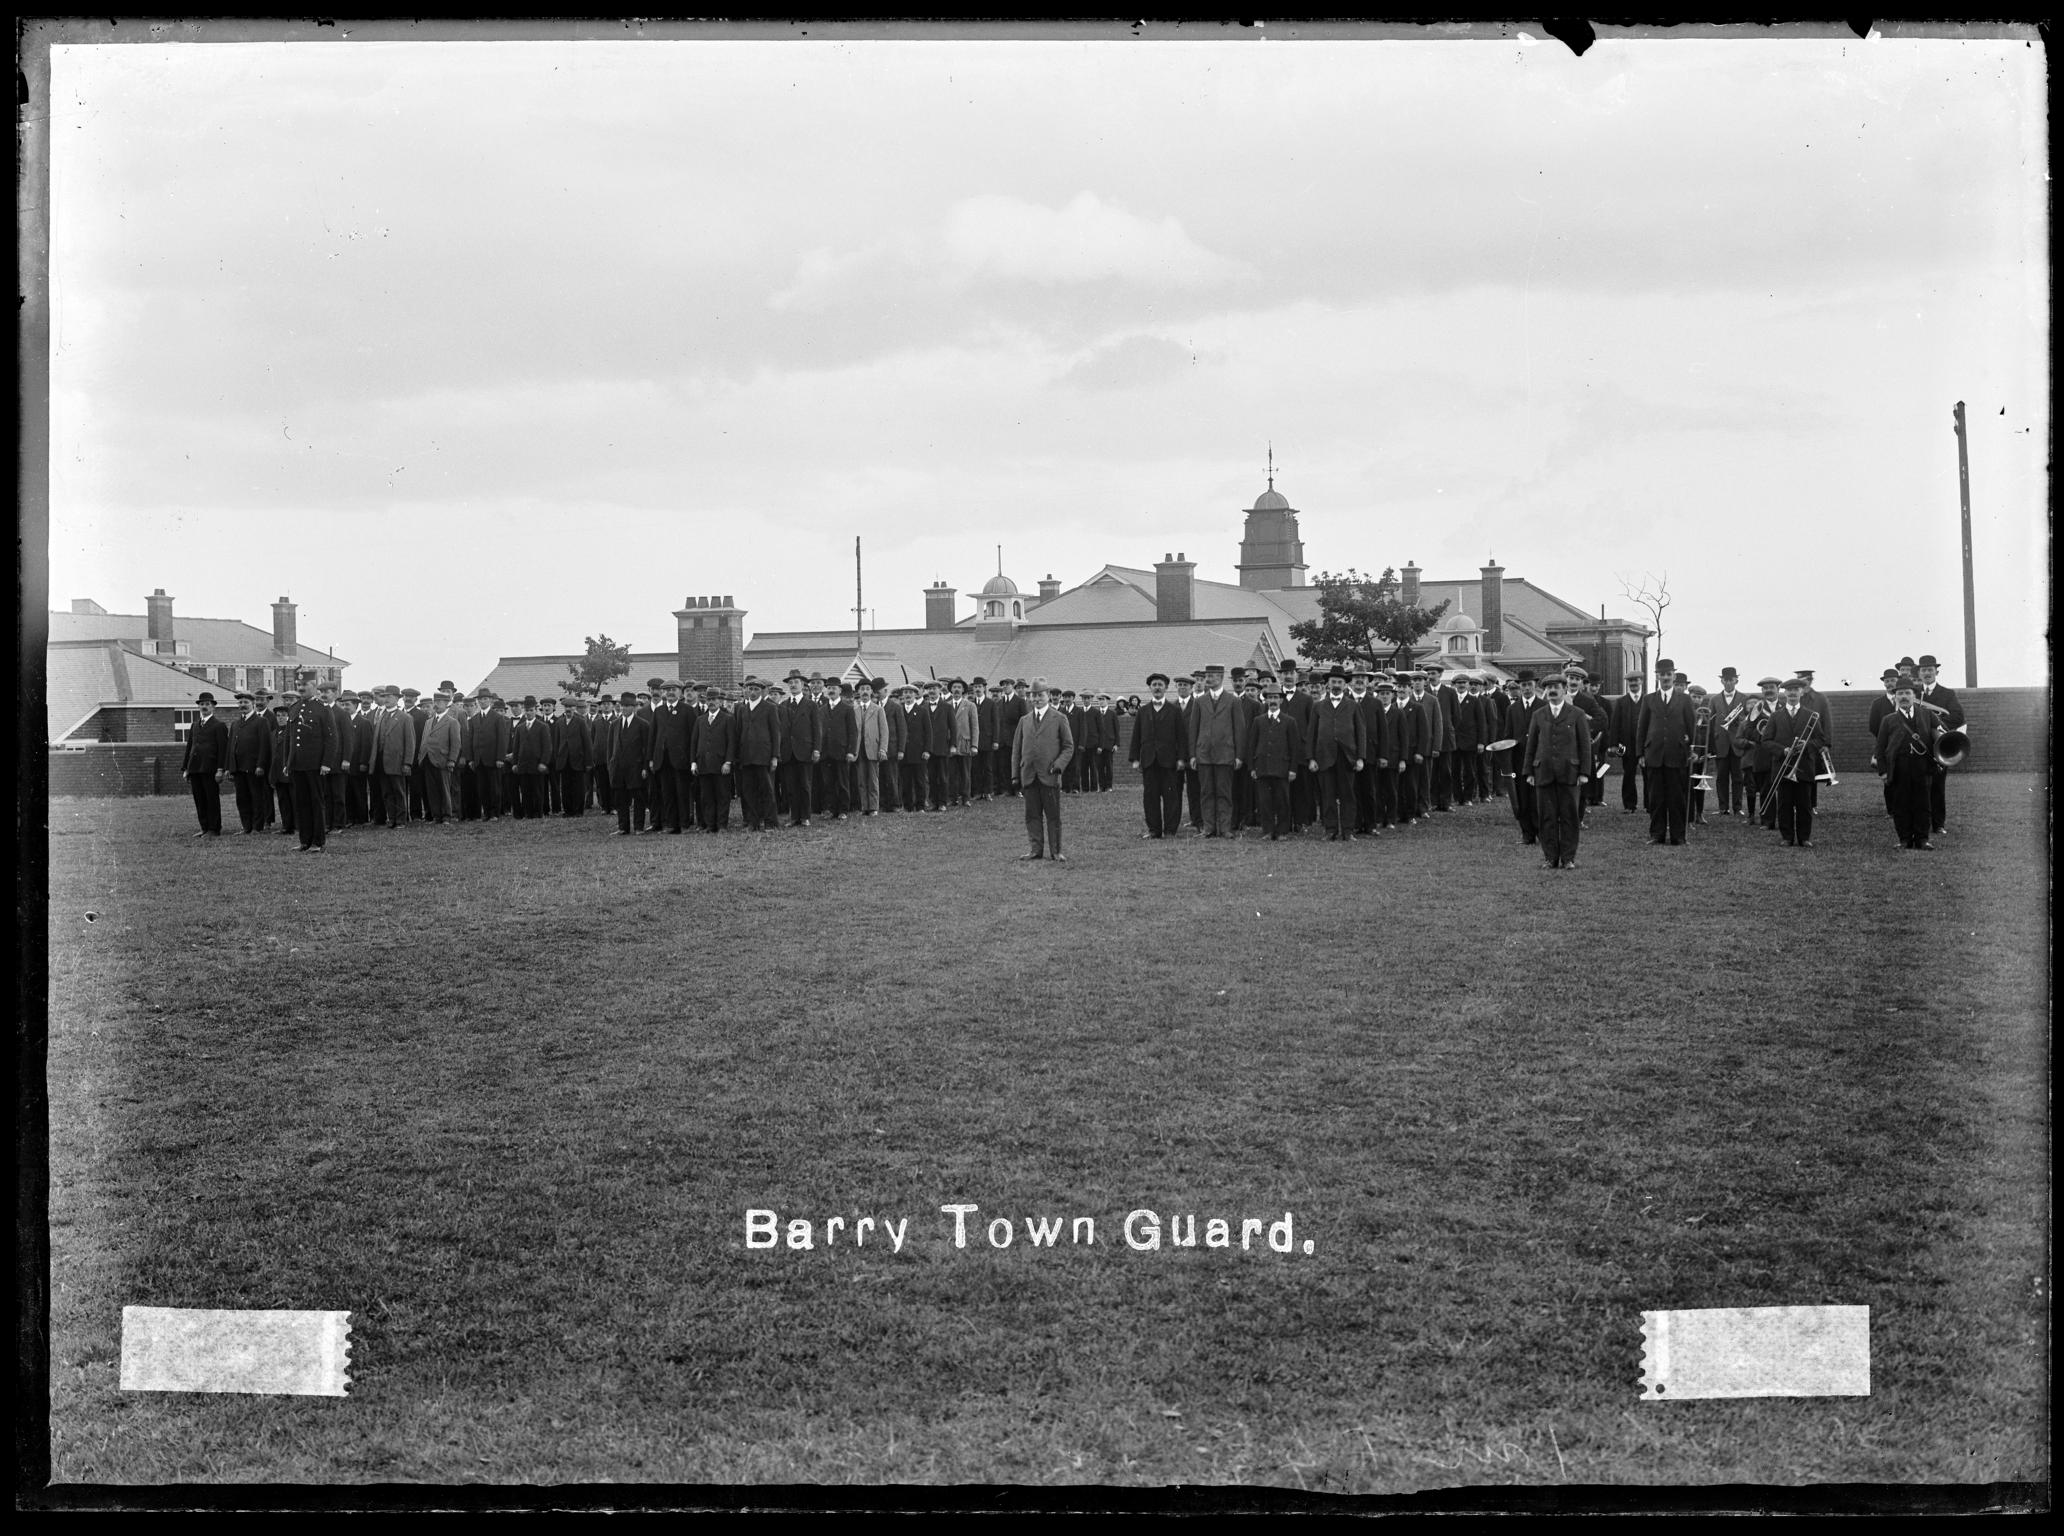 Barry Town Guard (negative)